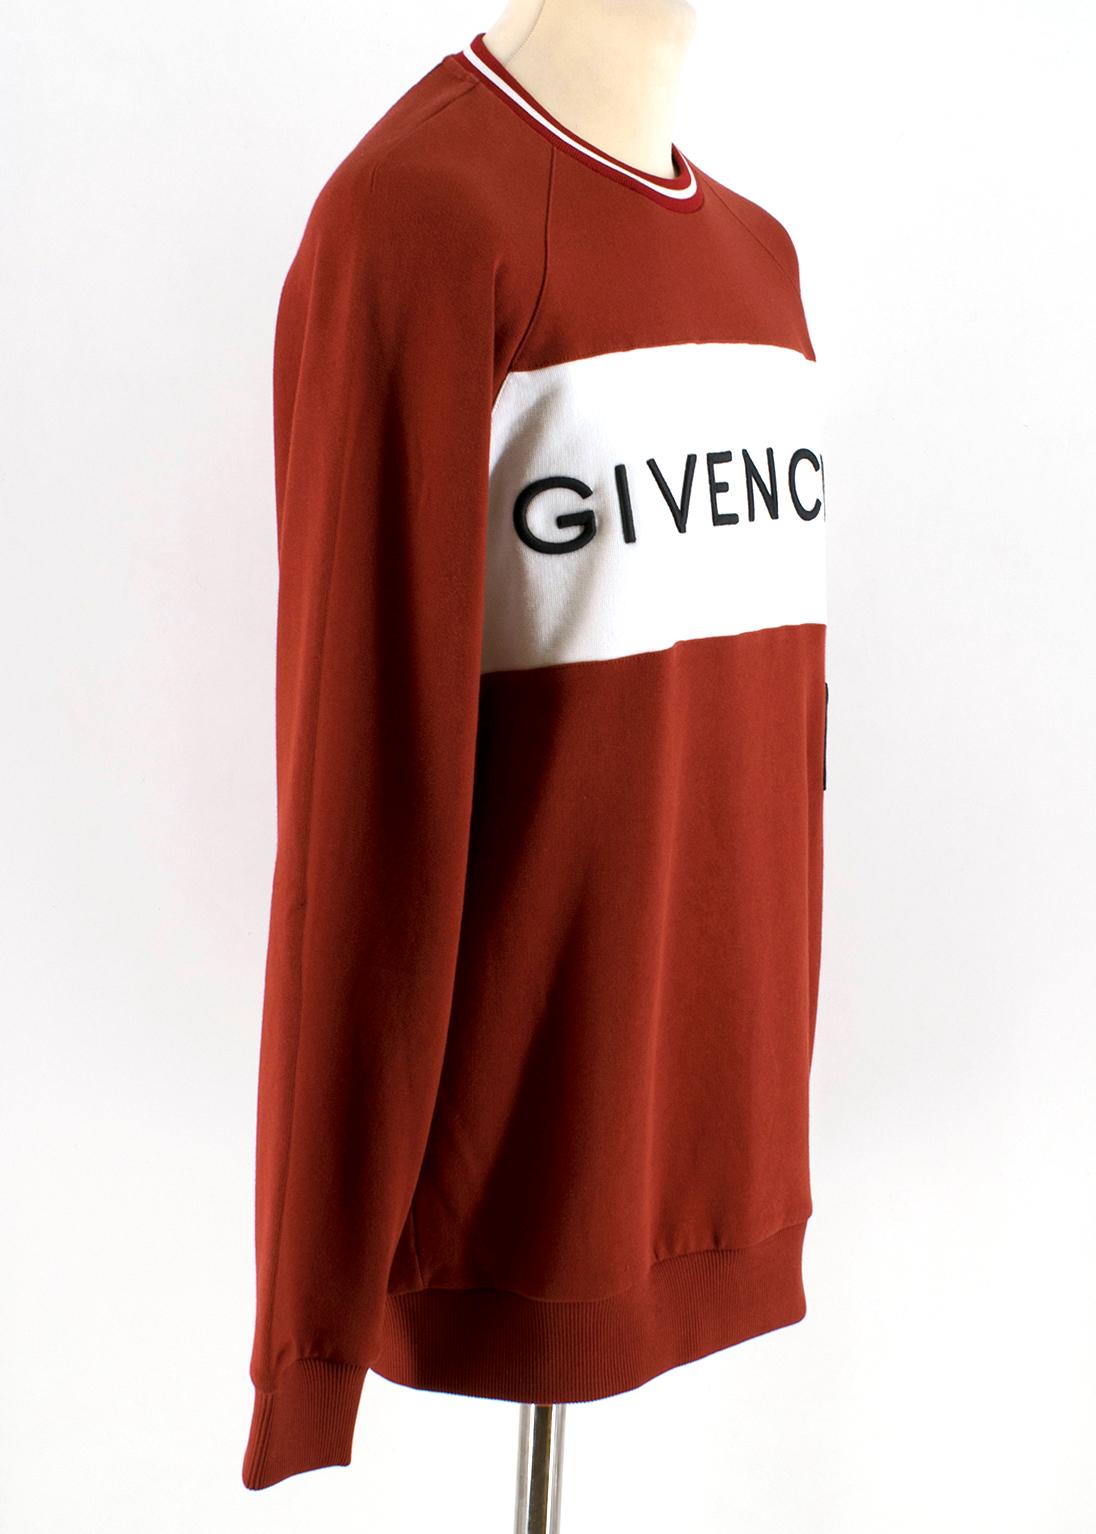 Givenchy Men's Red Intarsia Logo Sweater

-Red, 100% cotton
-Ribbed neckline, cuffs, trim
-White strip around chest and left shoulder with 